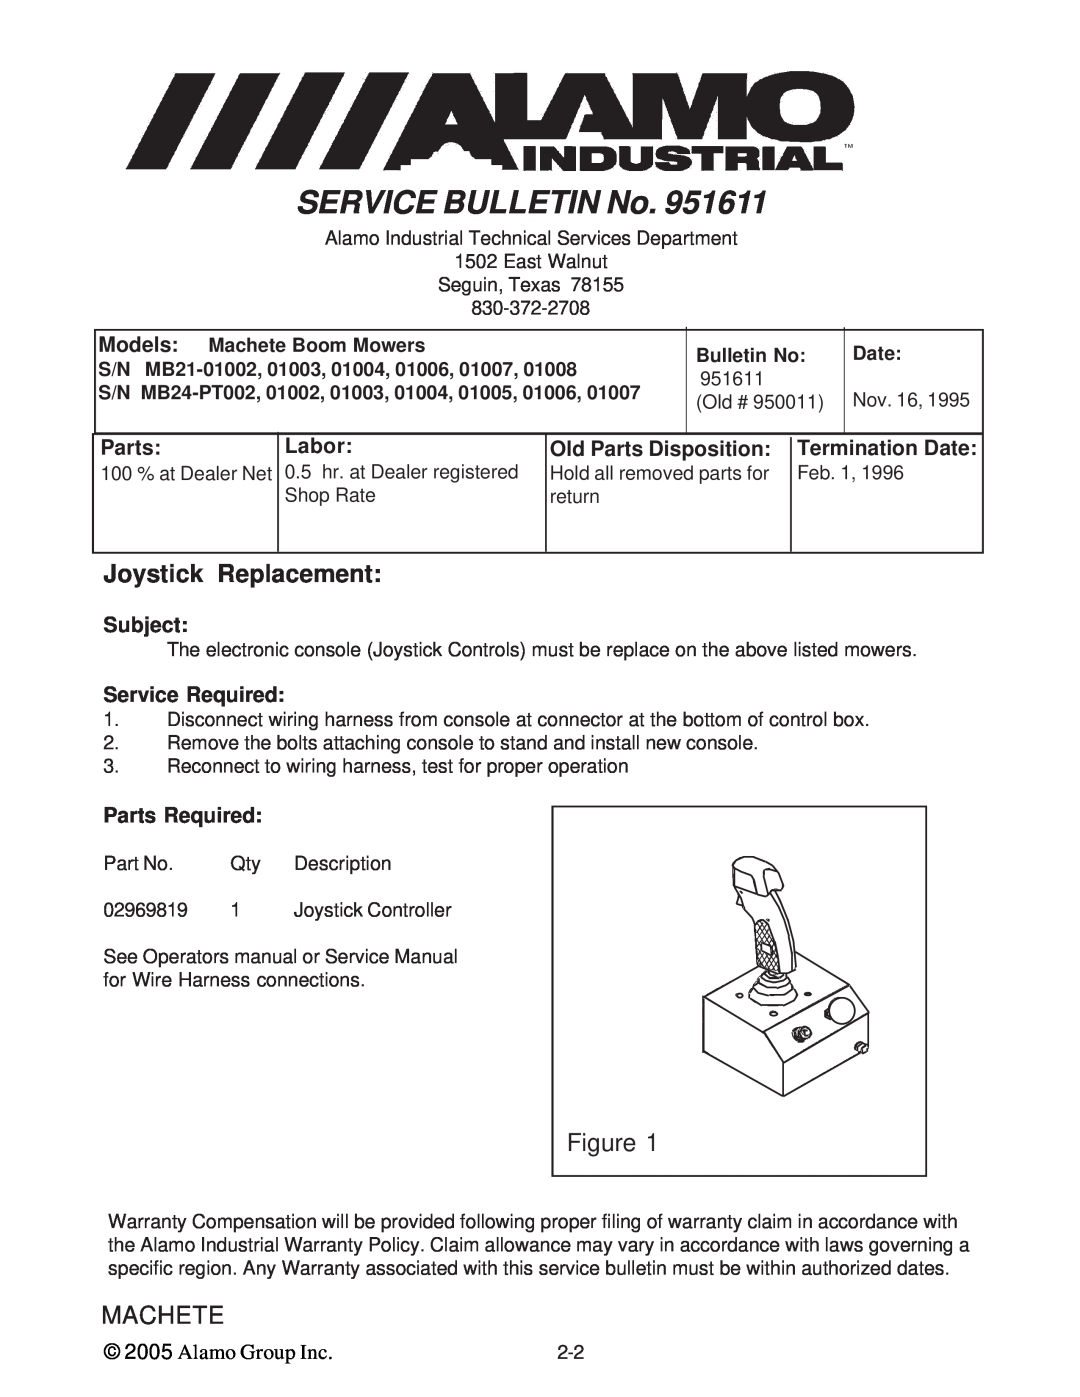 Alamo T 7740 SERVICE BULLETIN No, Joystick Replacement, Labor, Old Parts Disposition, Termination Date, 951611, Old # 